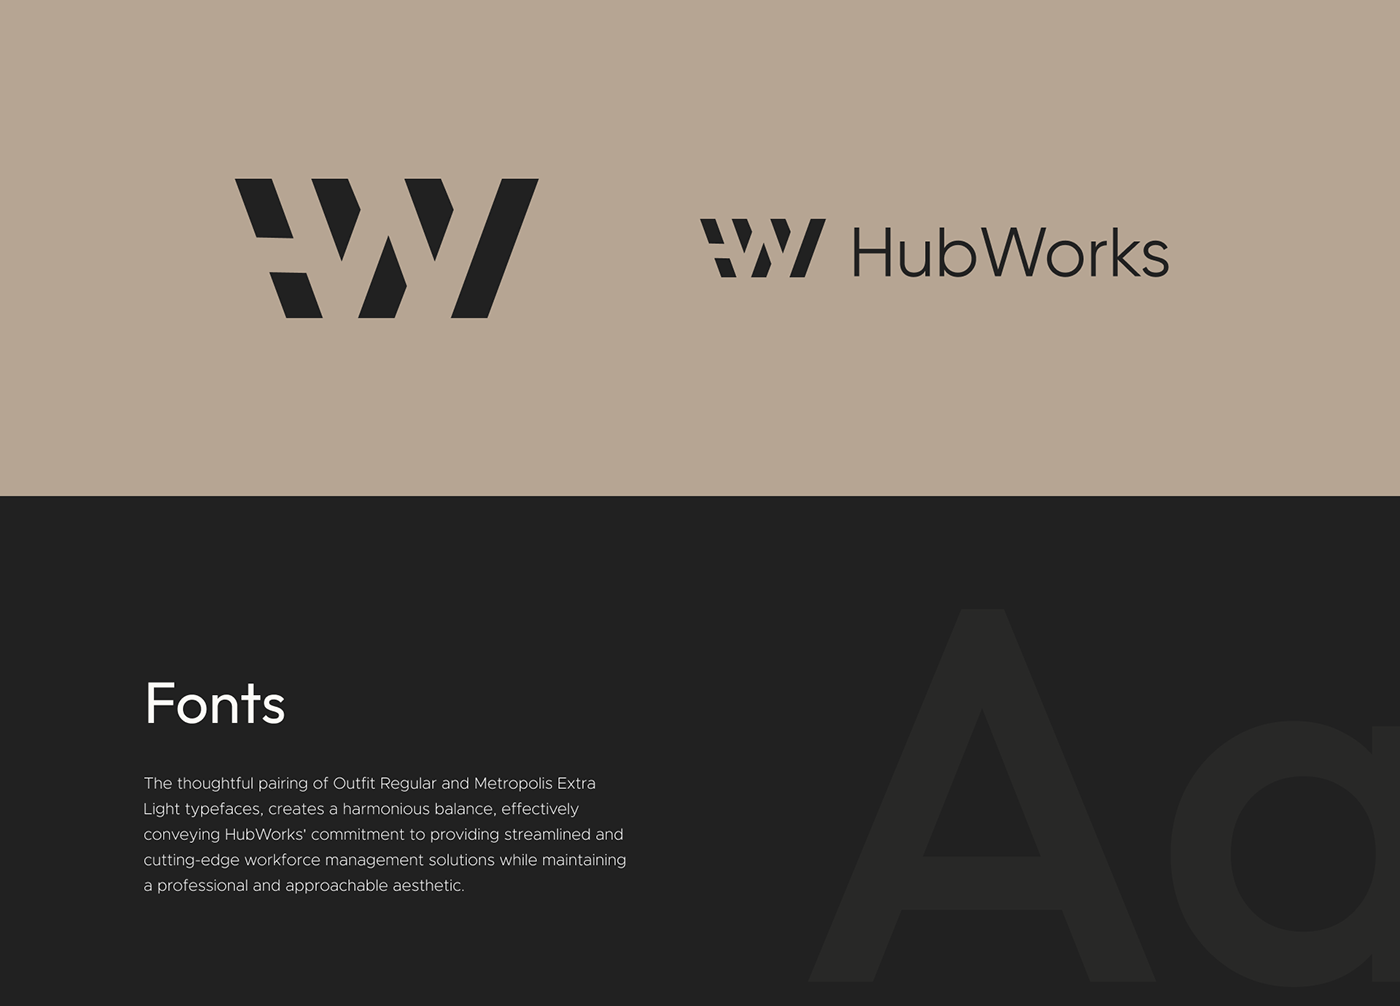 The branding project visual identity project with brand guidelines design for HubWorks